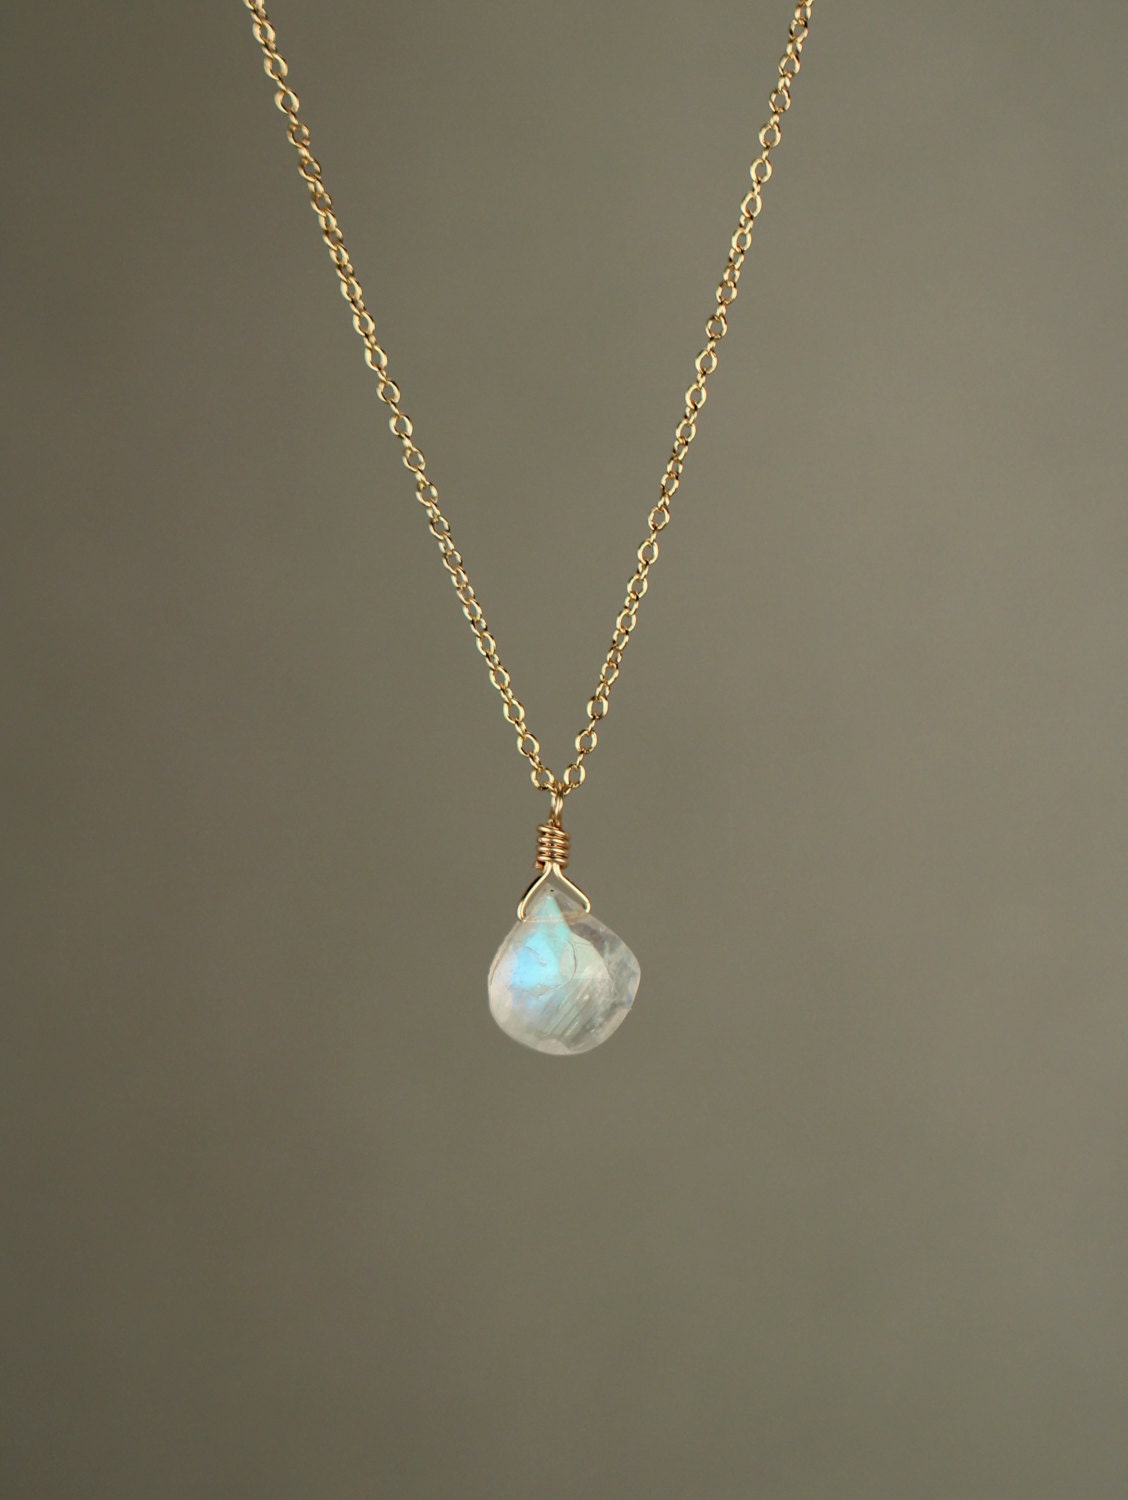 Moonstone Necklace Rainbow Moonstone Necklace Dainty And Delicate